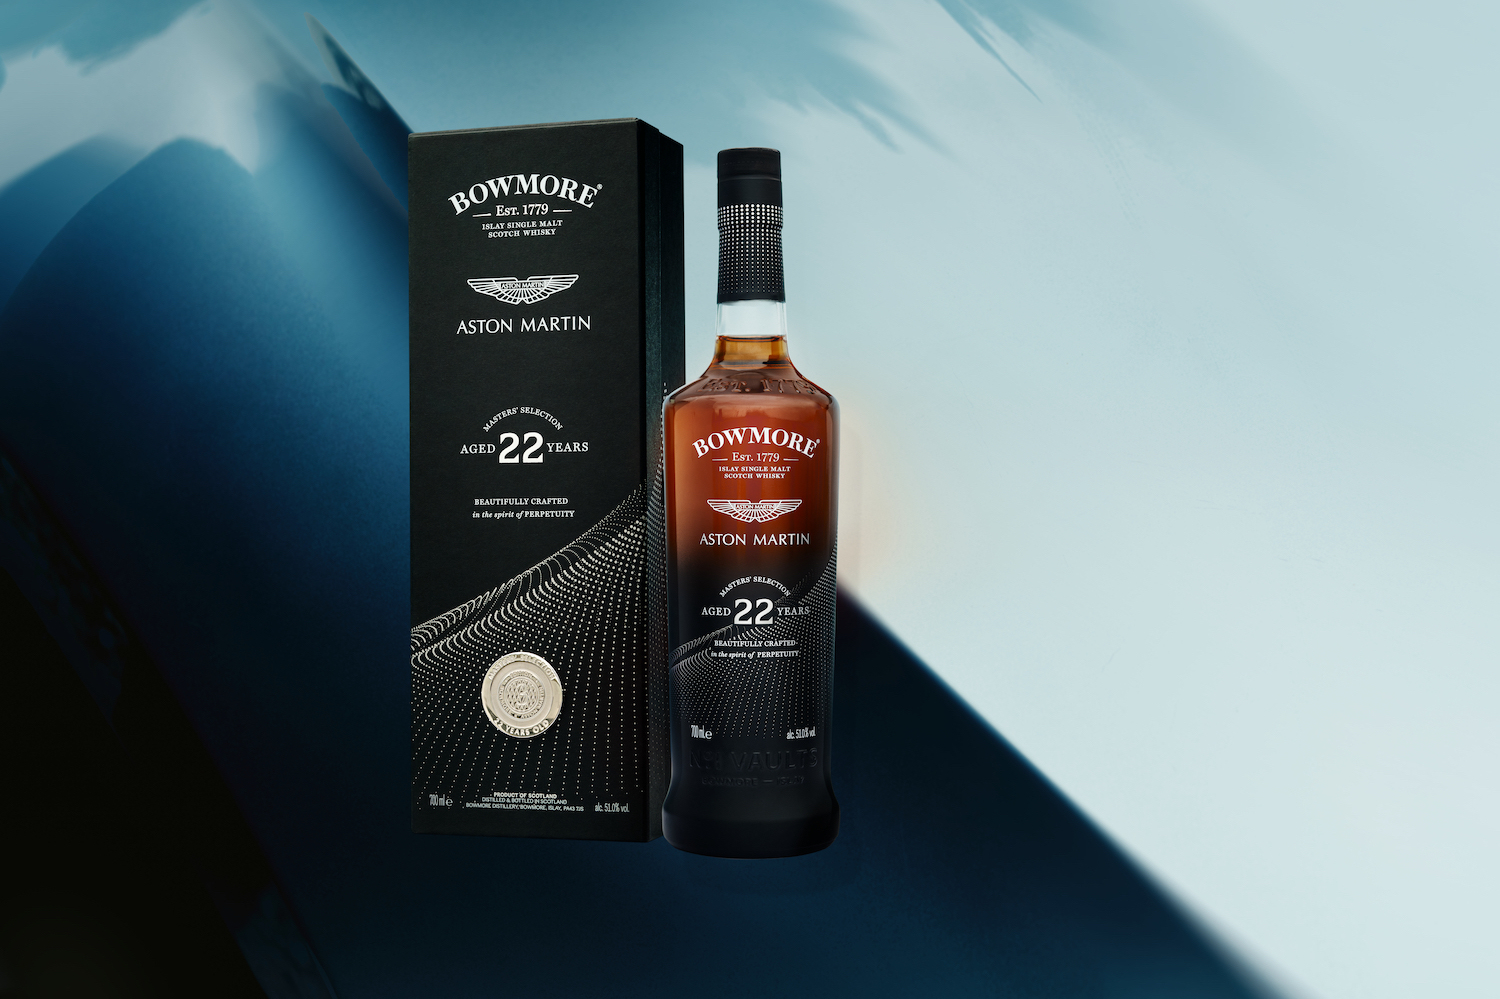 Bowmore Aston Martin Masters’ Selection 22 Year Old